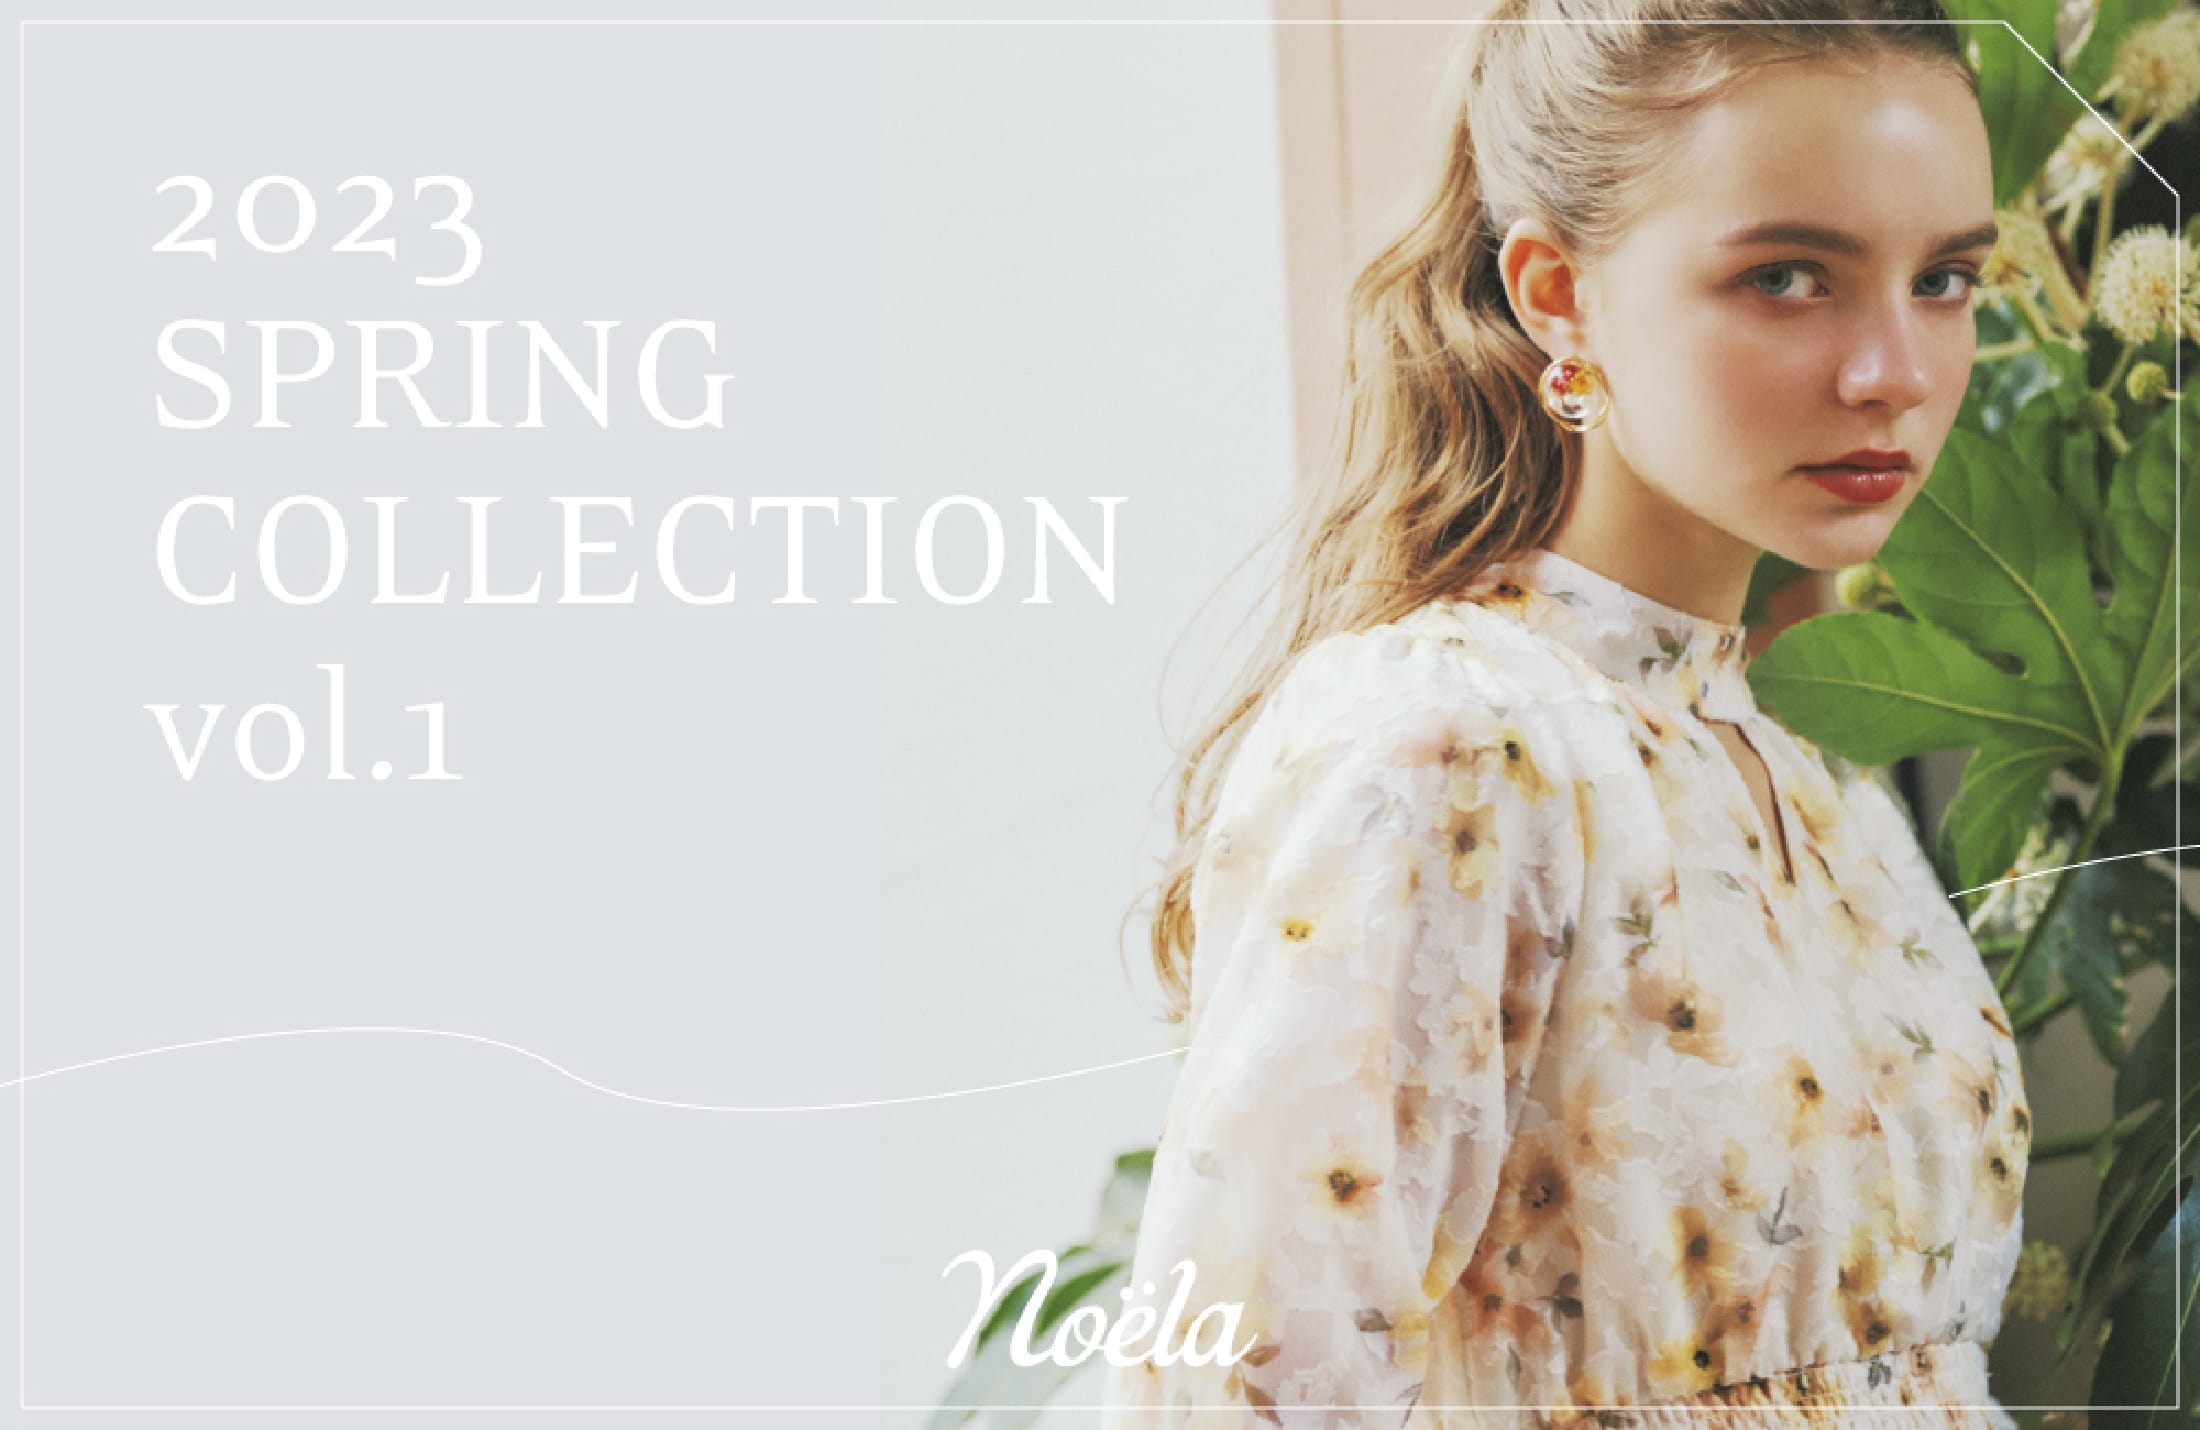 2023 SPRING COLLECTION vol.1